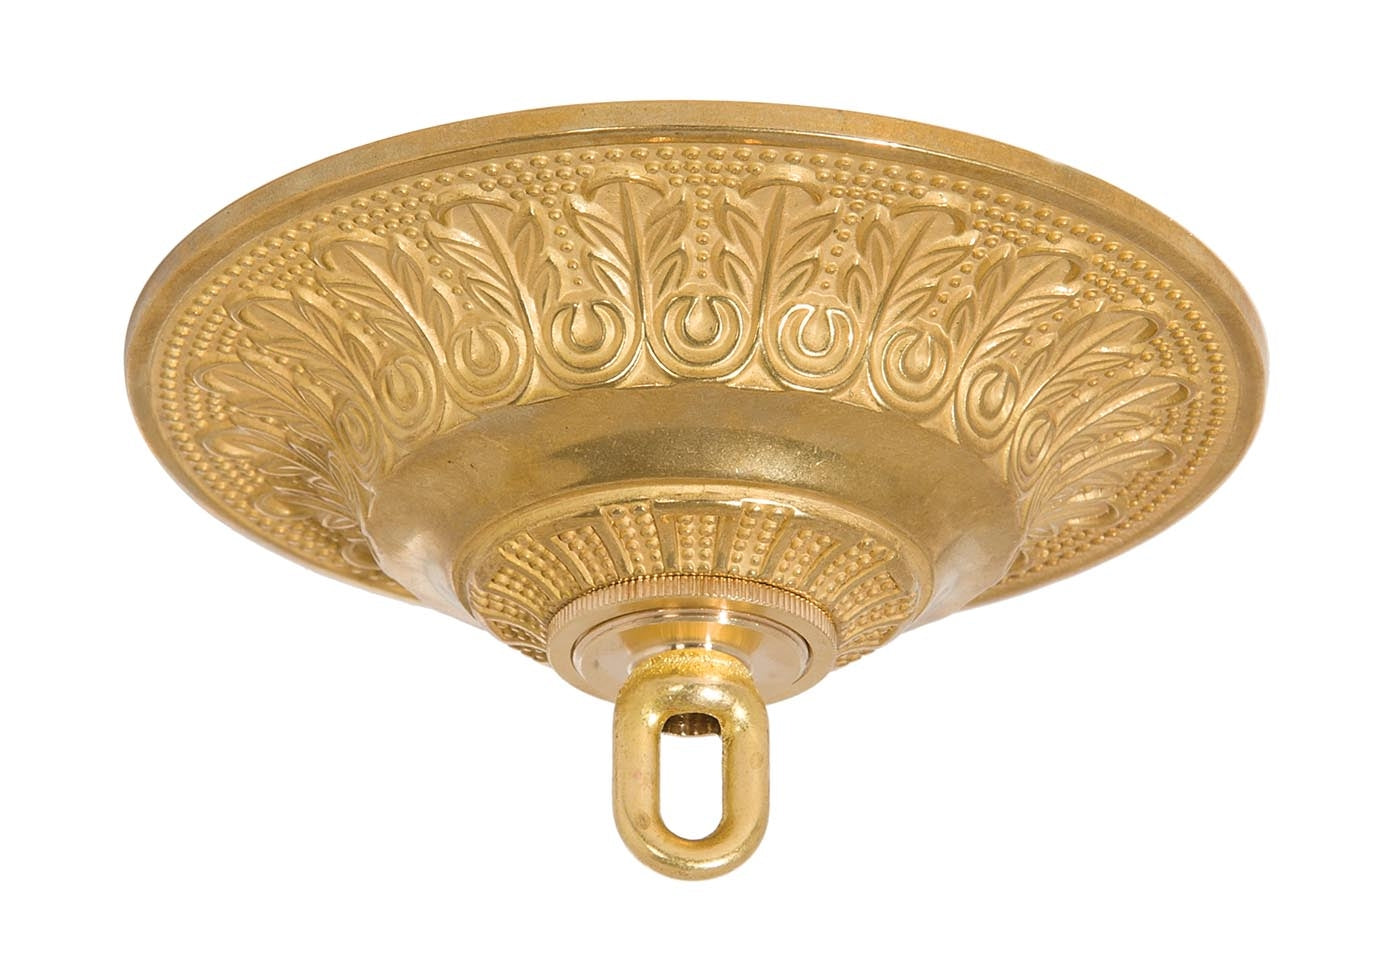 6 Inch Diameter Fine Quality, Vintage Style Die Cast Brass Canopy with Mounting Hardware Kit